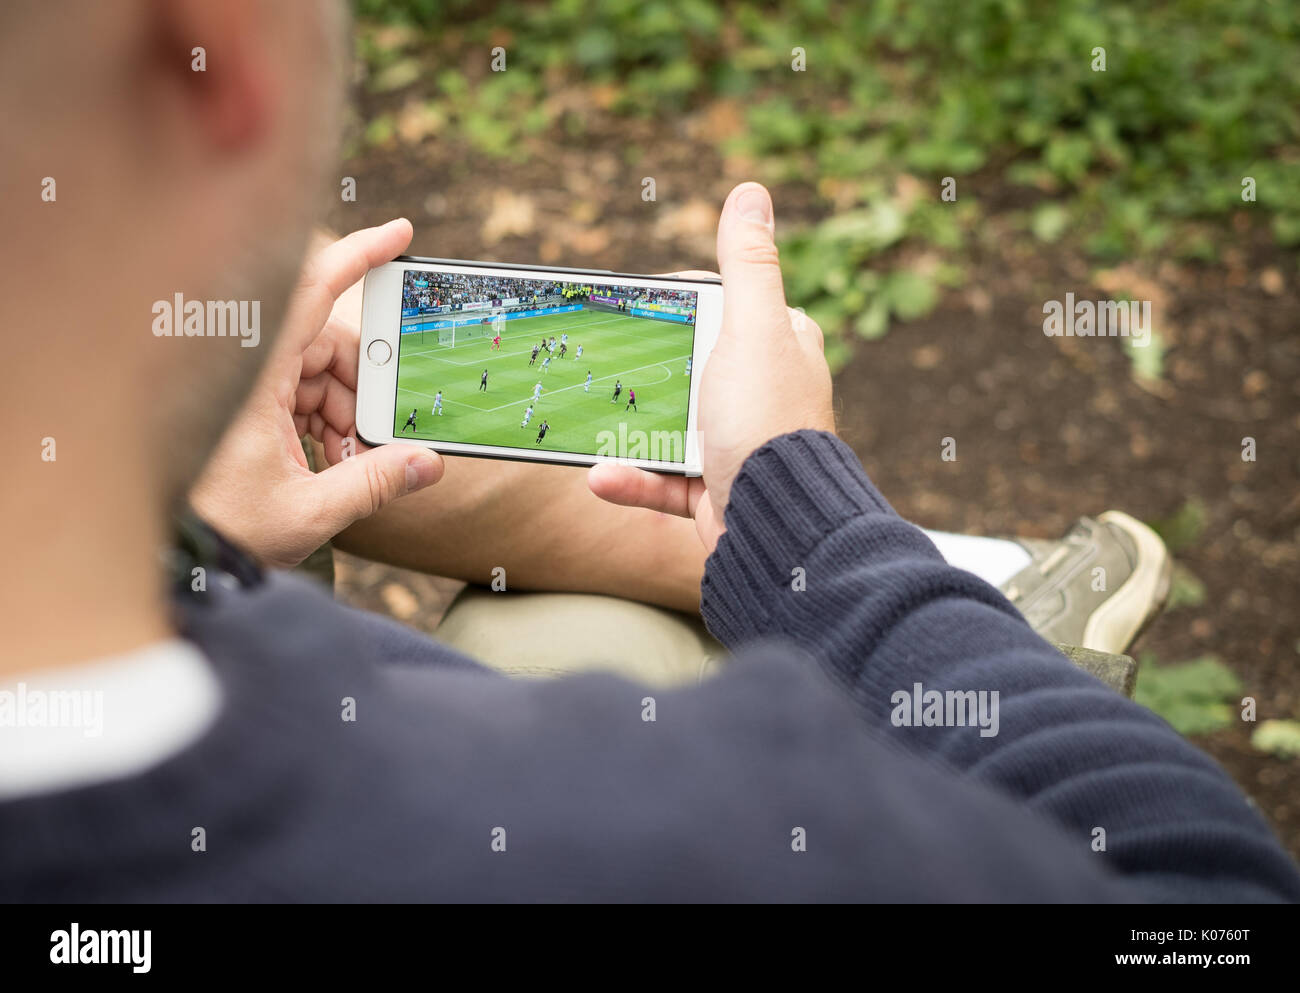 Man watching streaming football game on smartphone in rural location Stock Photo